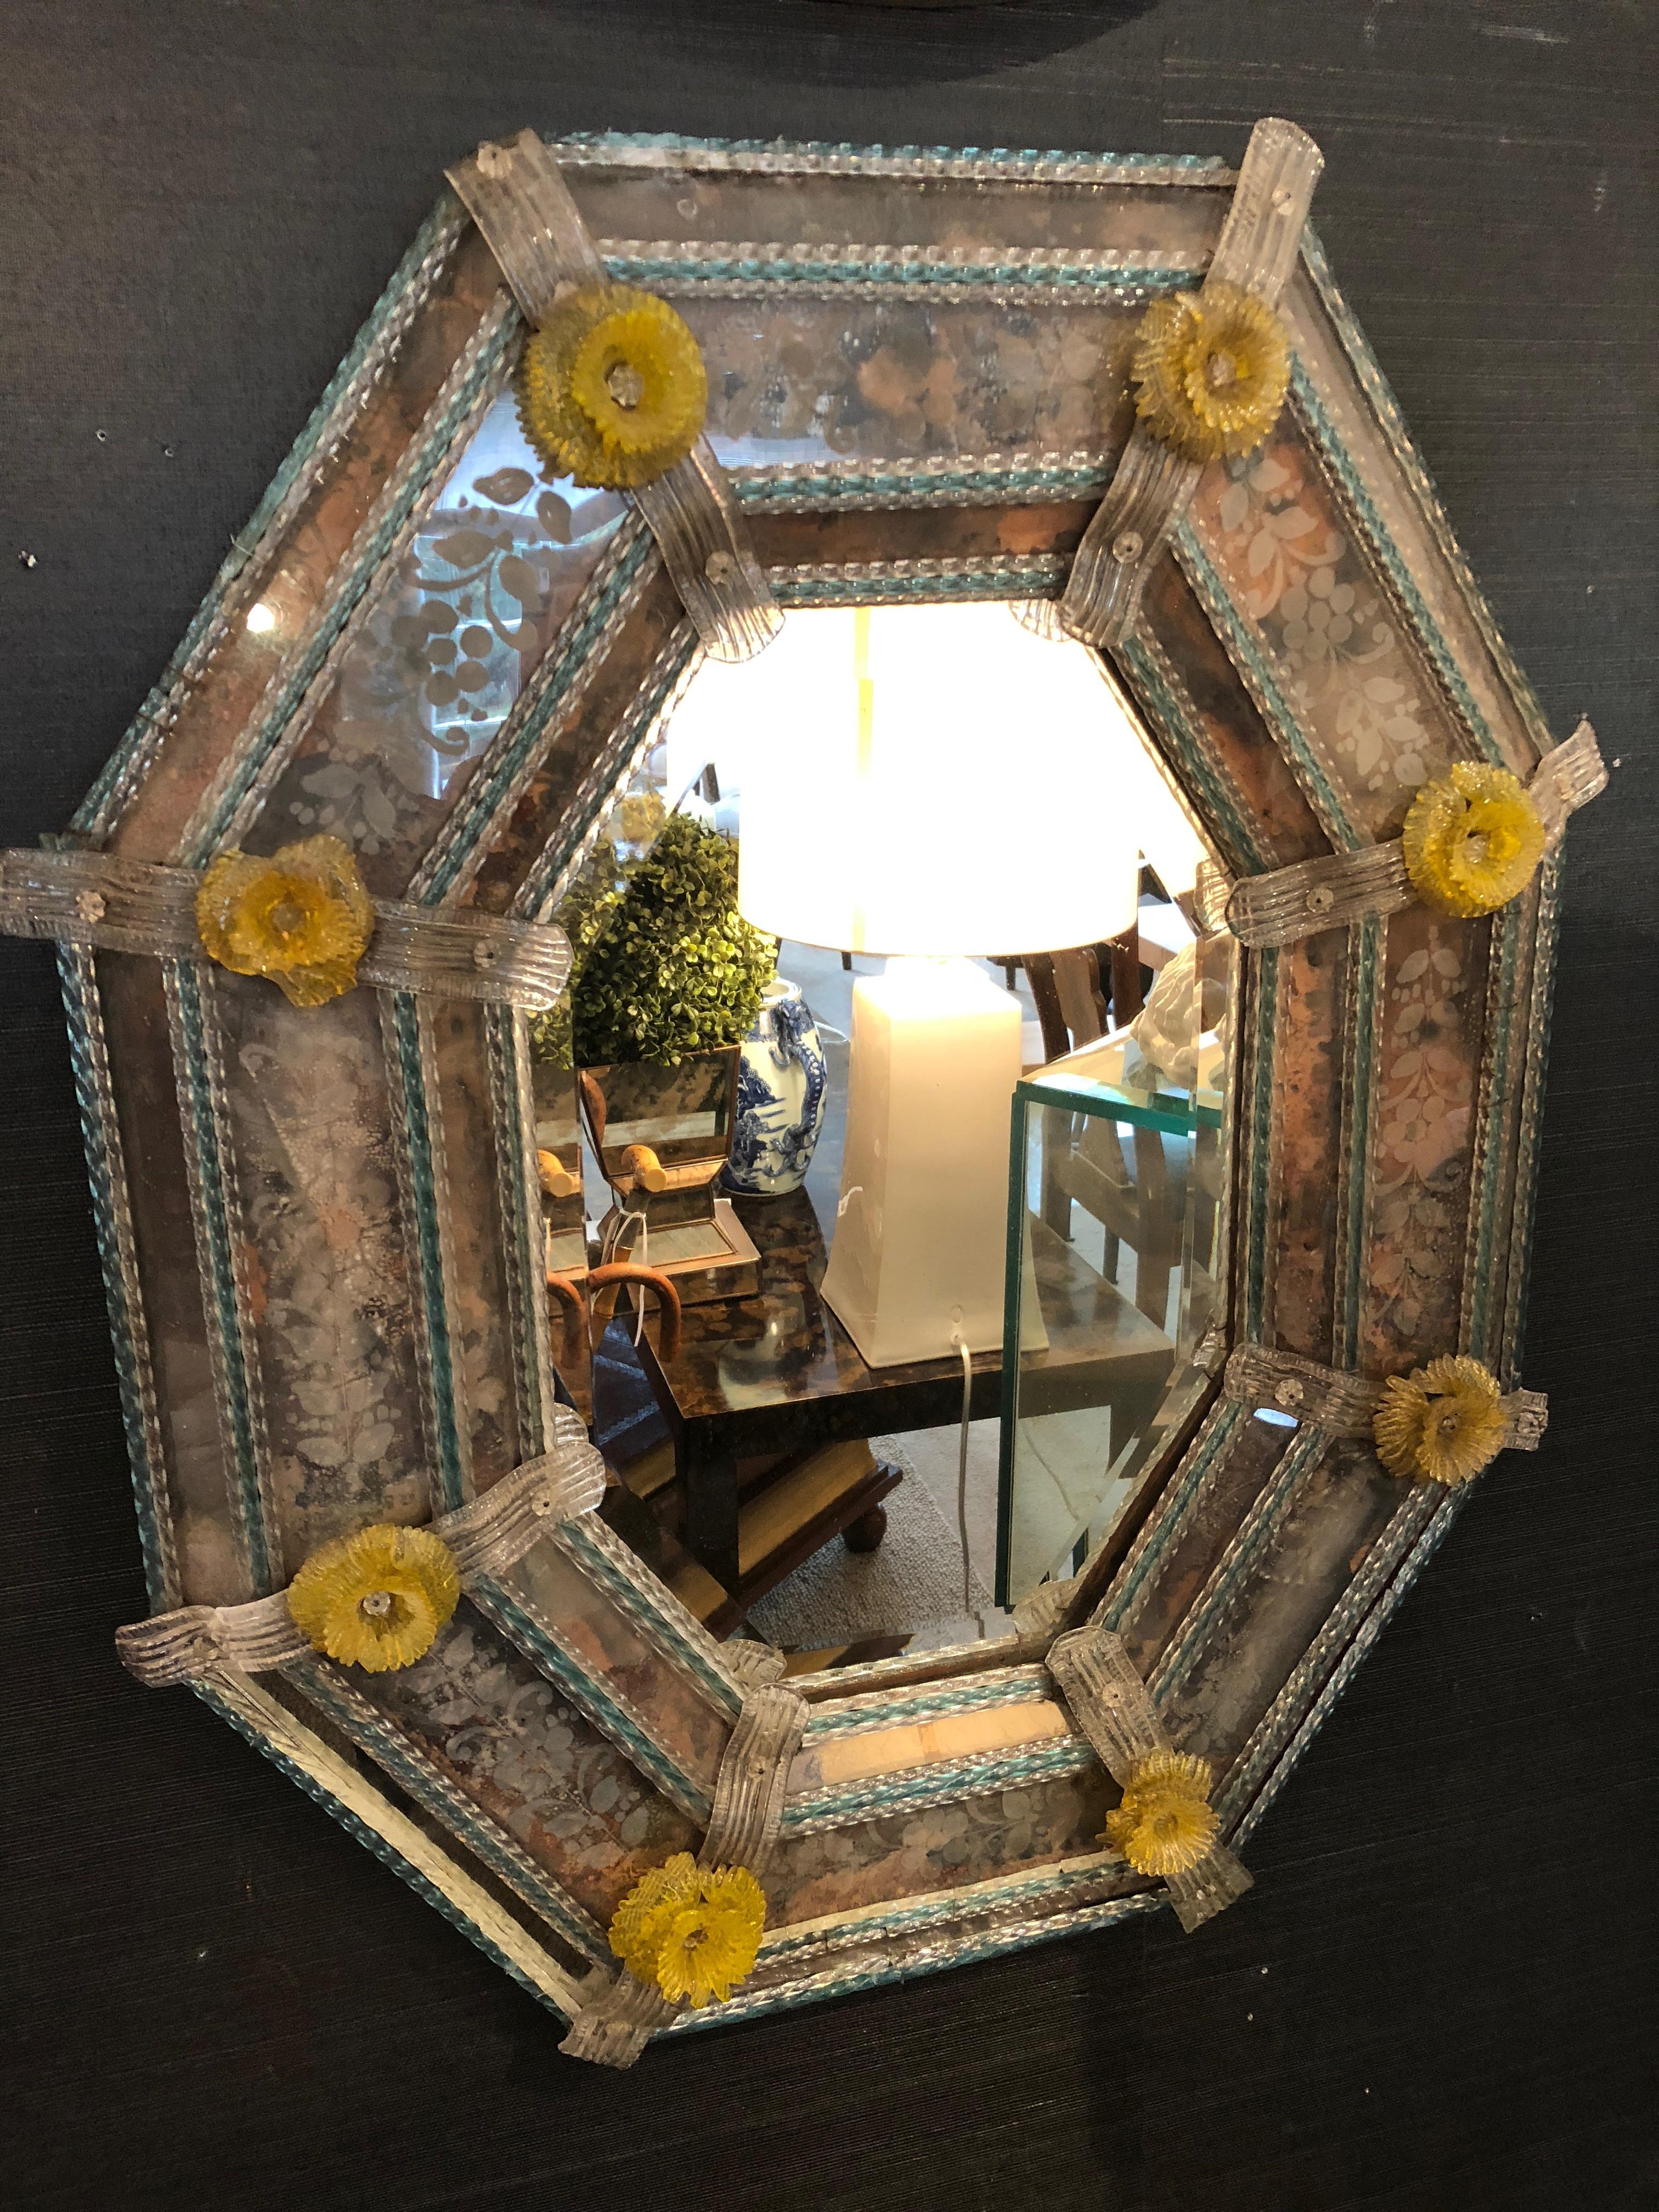 Fantastic 19th century Venetian mirror having rare details and colors. Etched panels surround the body of the mirror having intricate blue and clear glass piping around the frame and yellow glass flowers.
Mirror has been professionally restored,